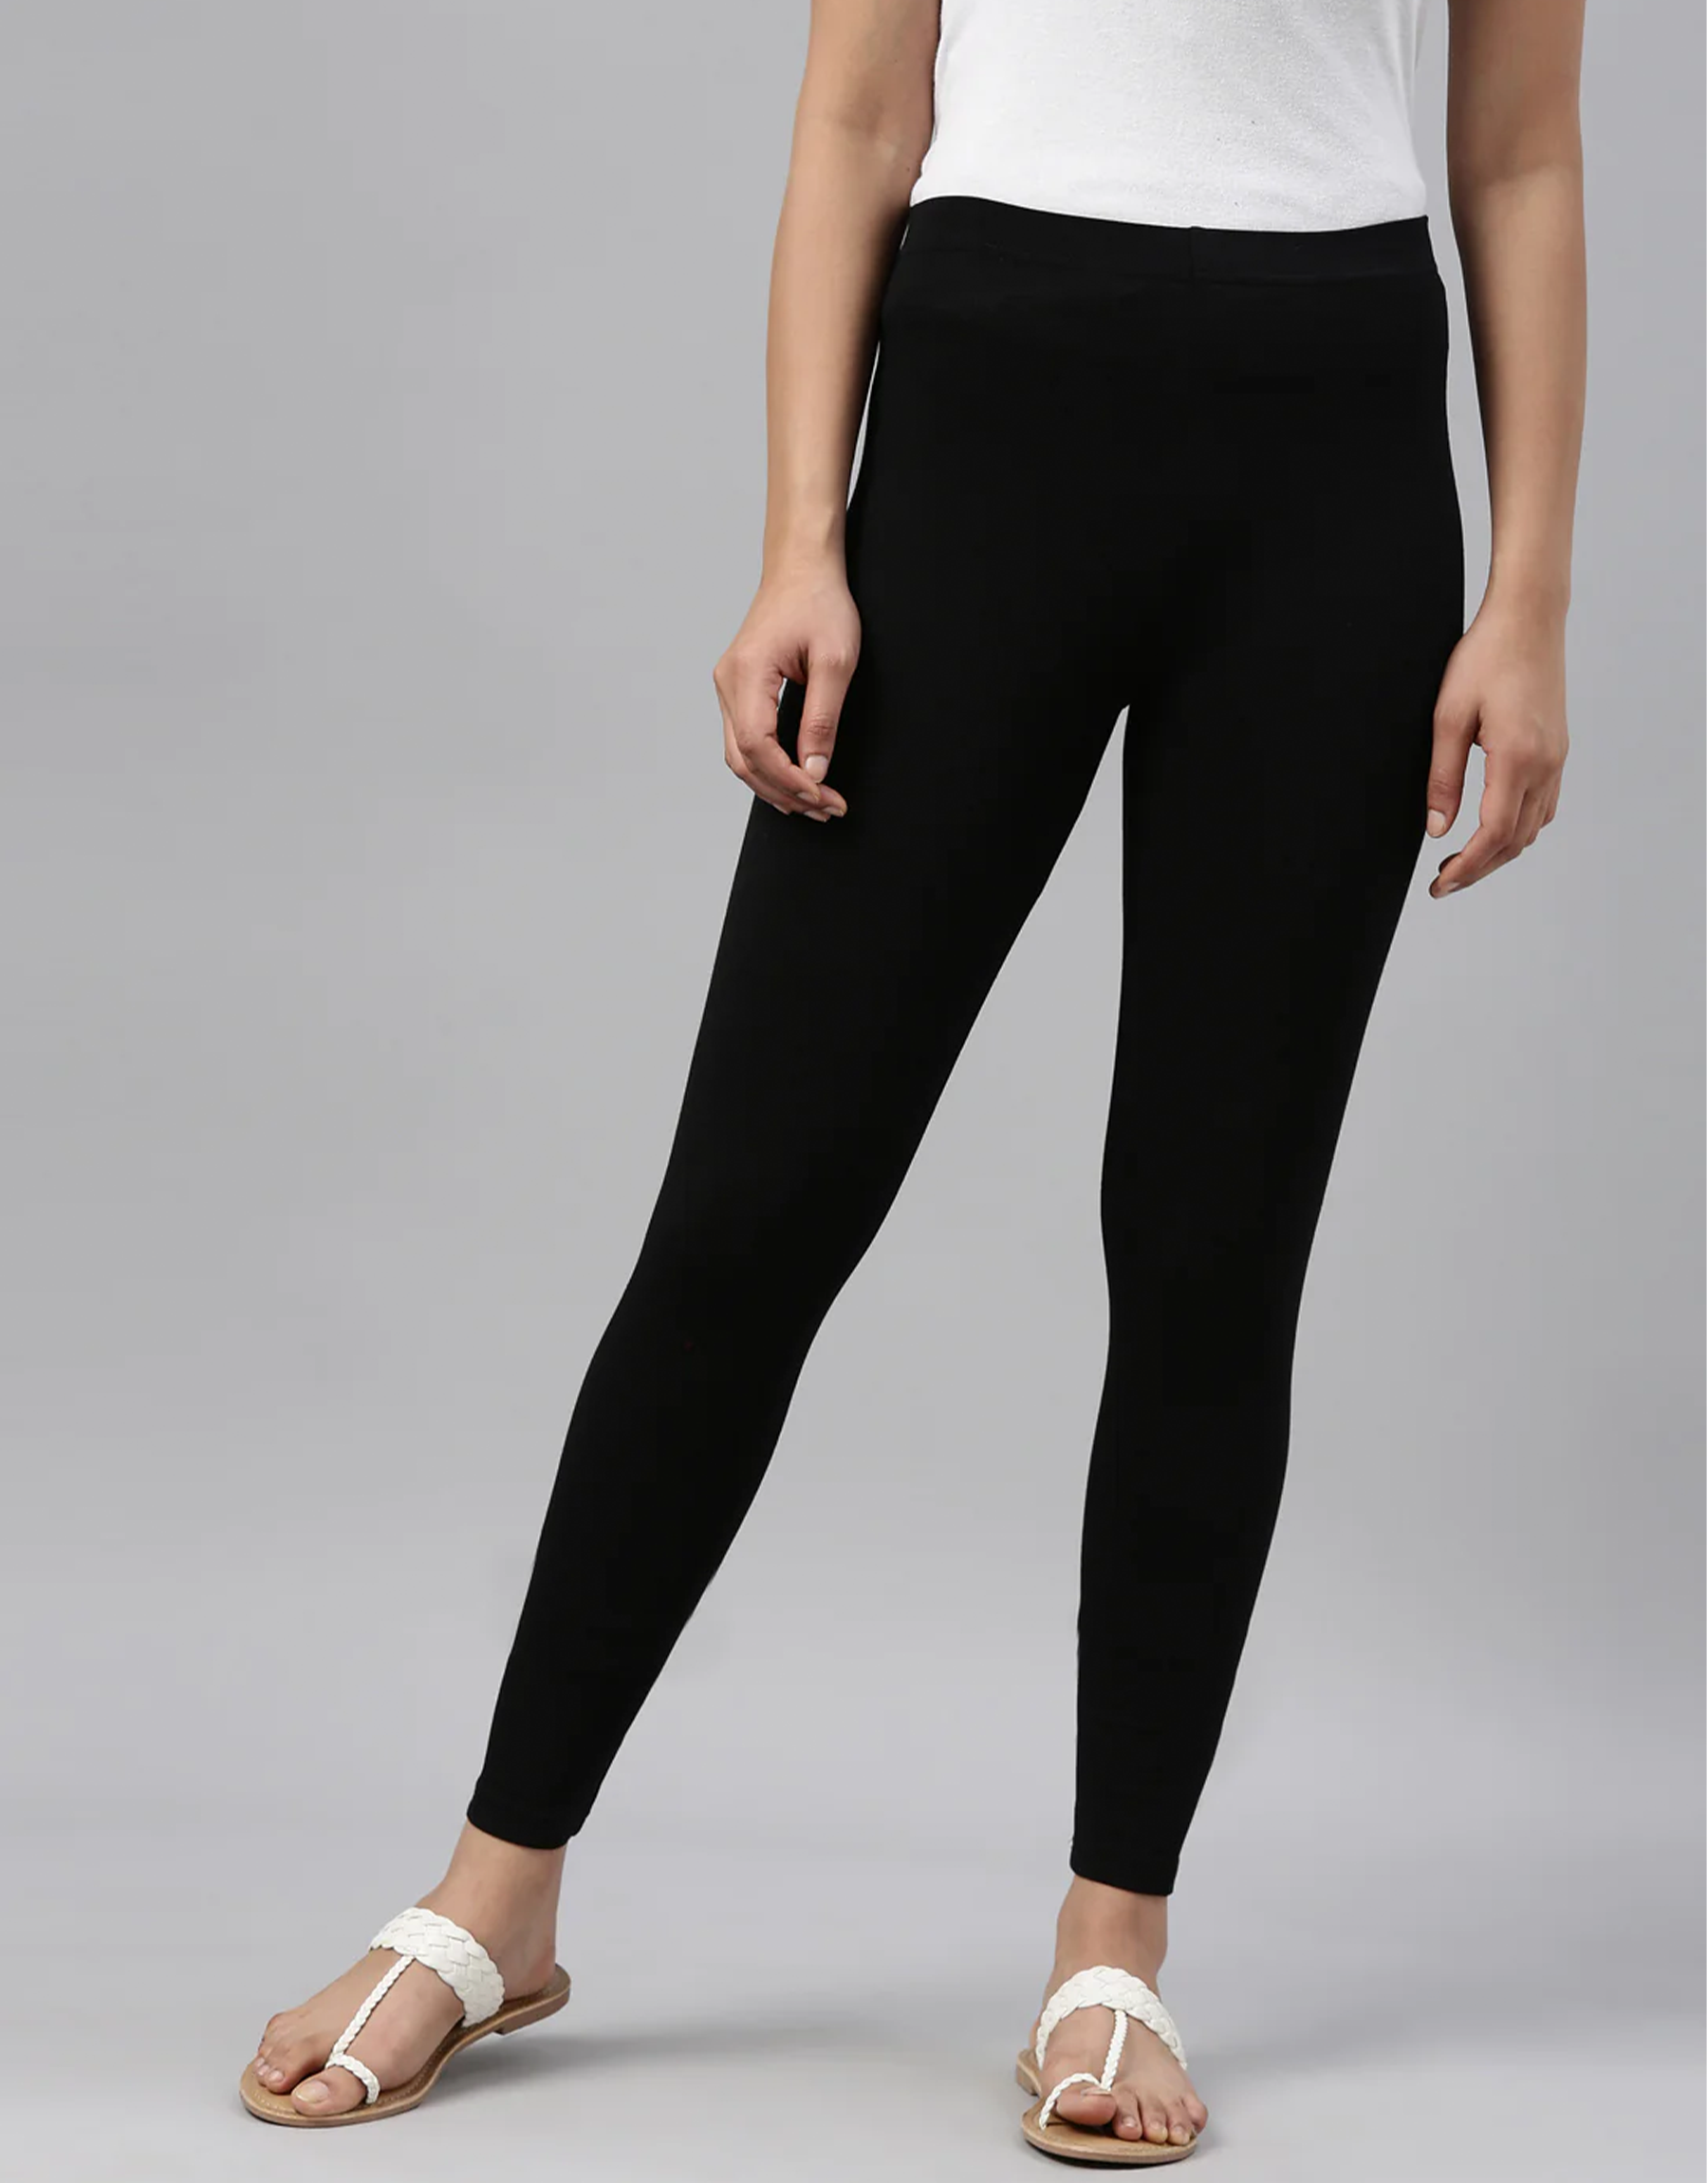 Buy ESS Women's Cotton Stretchable Ankle Leggings for Women/Girl (L, Black)  at